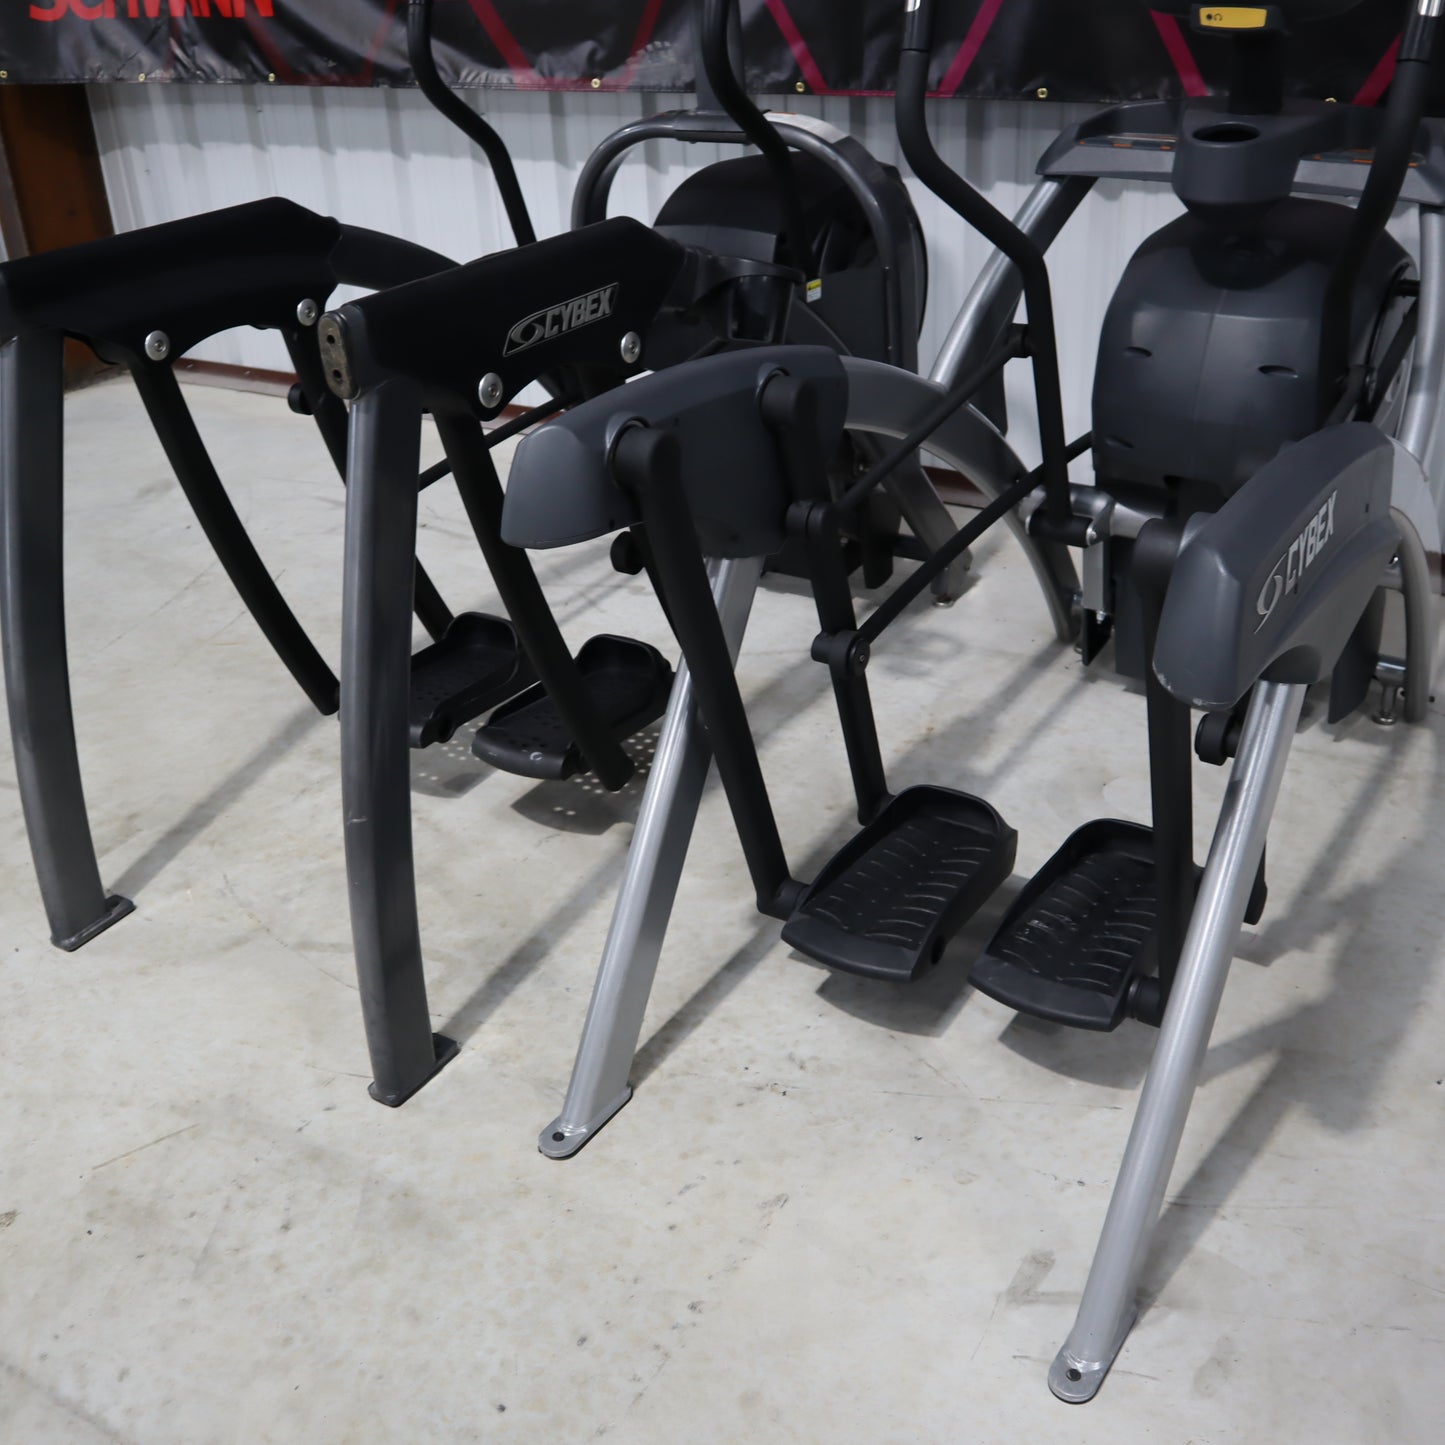 Cybex Arc Trainer Package *One 630A Total Body, One 626AT Total Body* (Used)